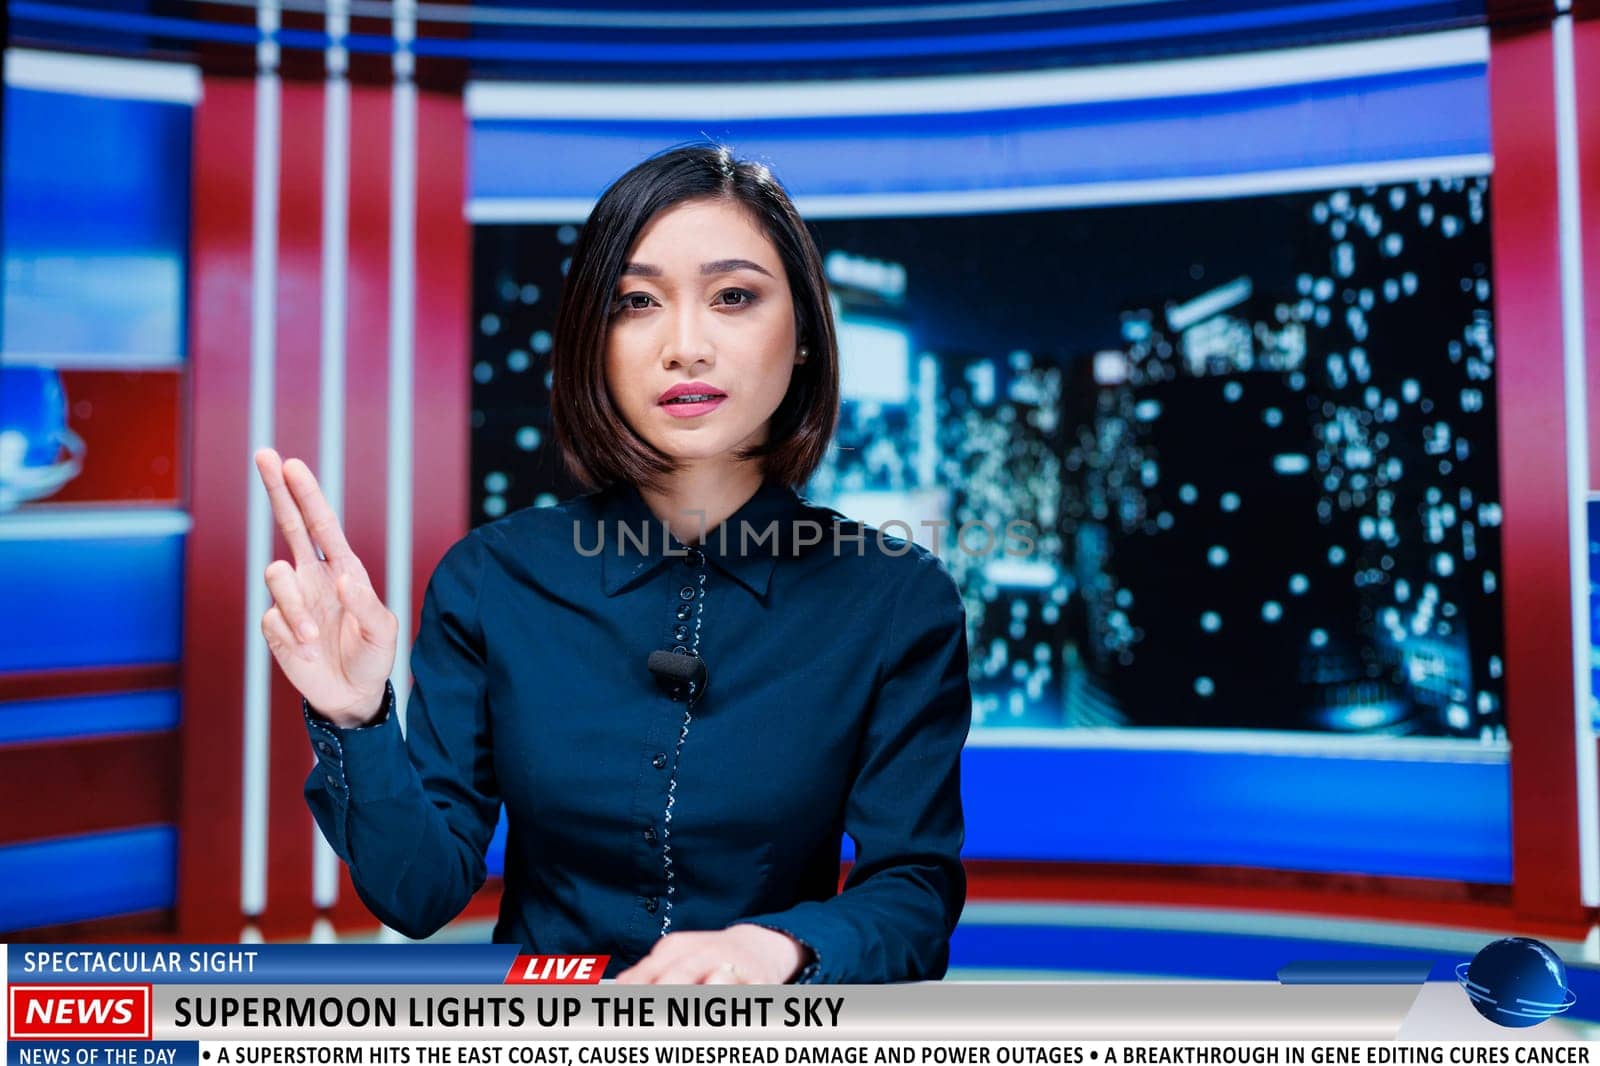 Correspondent addresses supermoon incident on talk show, delivering live commentary on sky illuminating massive moon. Asian tv host on global television channel reading headlines.